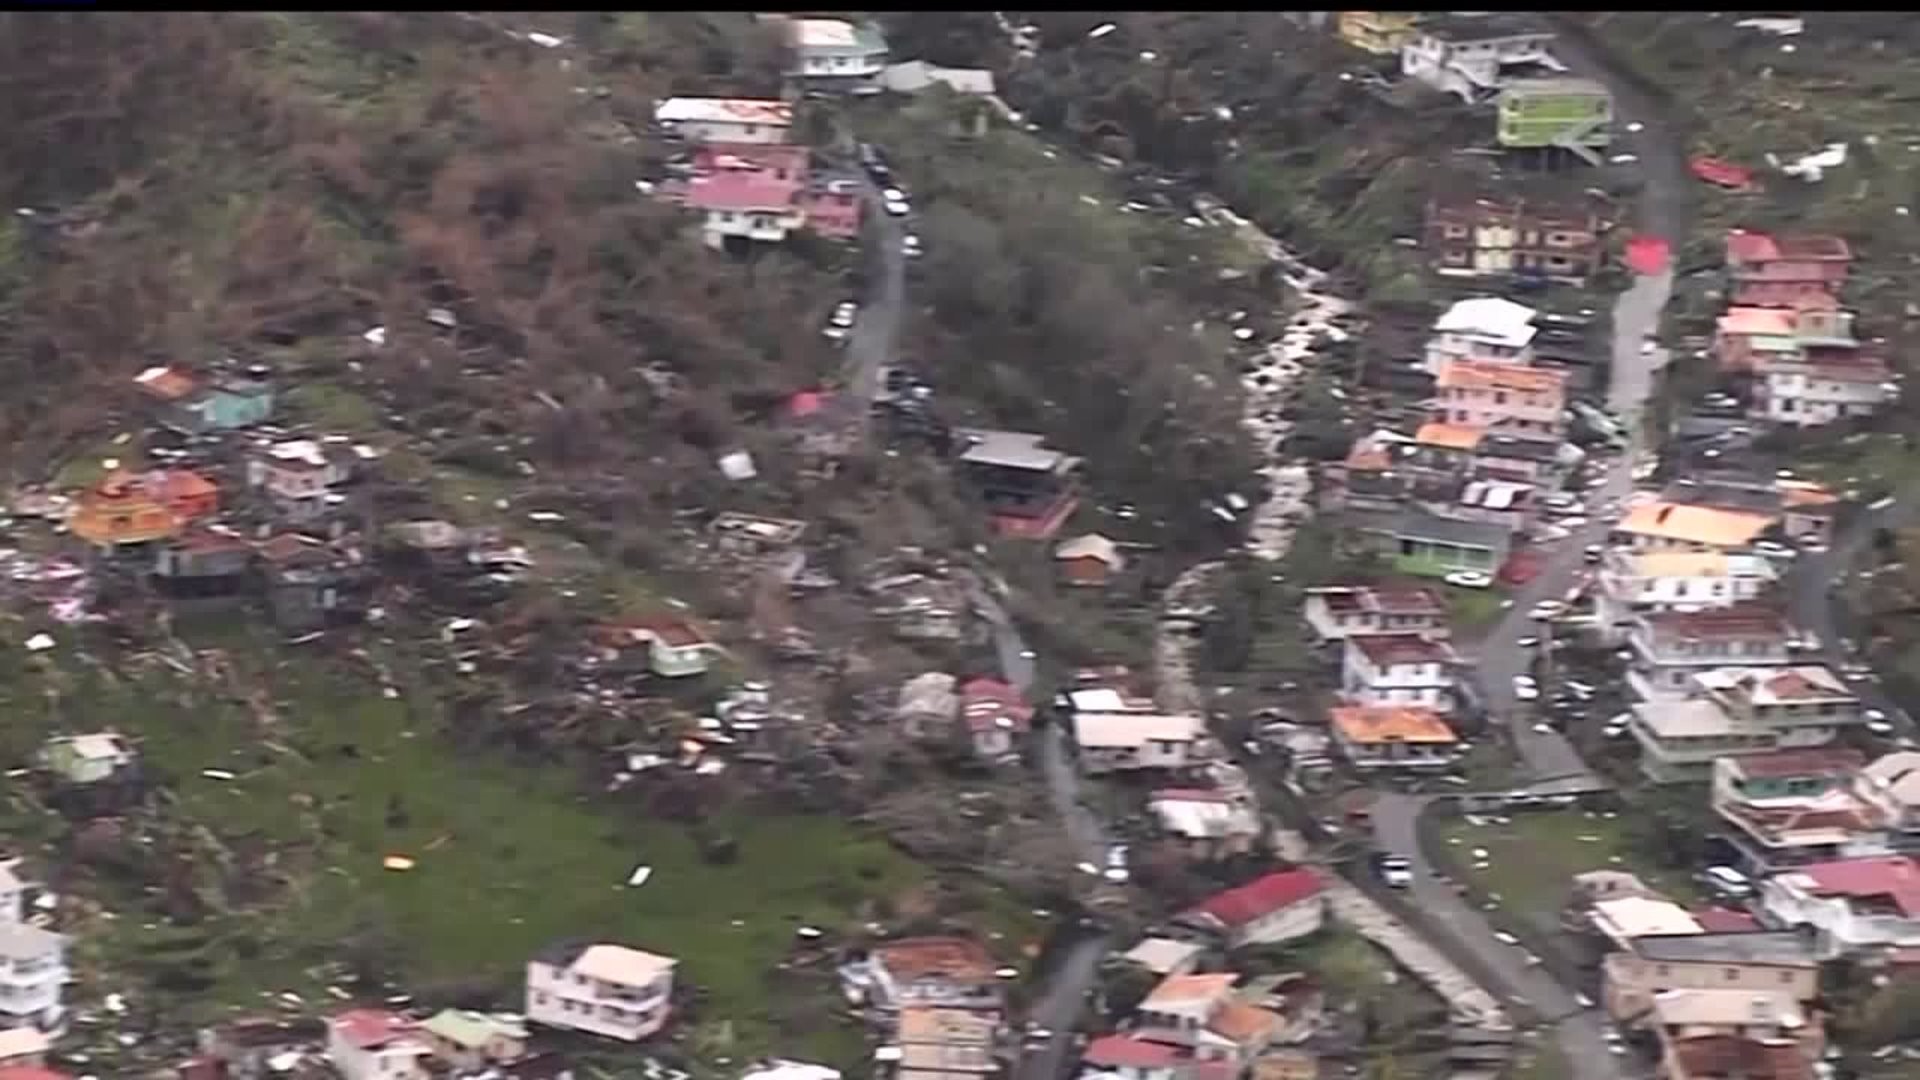 Lancaster businesses unite to raise funds for people affected by hurricane in Puerto Rico